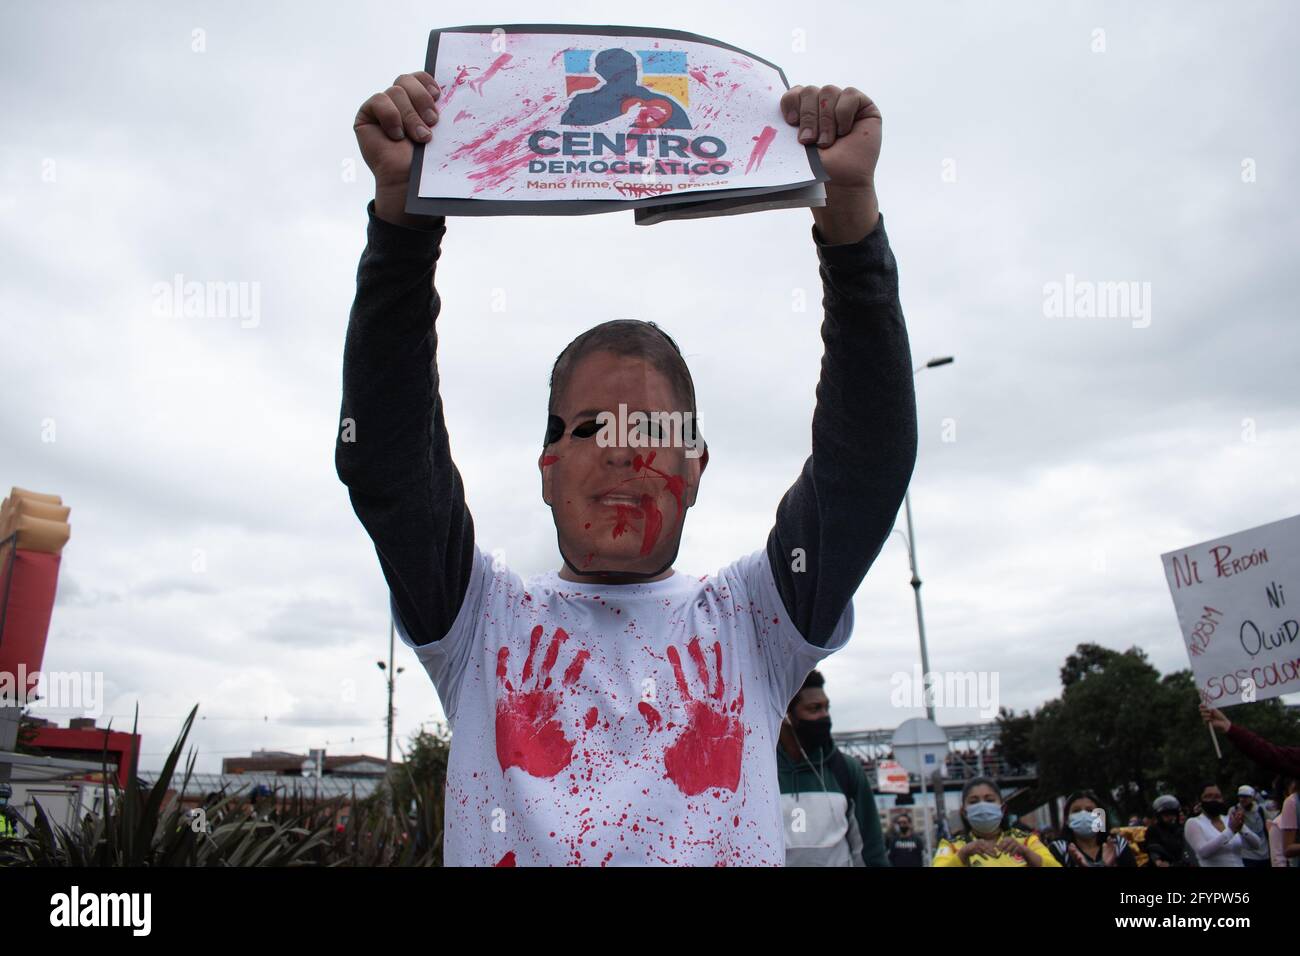 Bogota, Cundinamarca, Colombia. 28th May, 2021. a protester wears a mask of the face of President IvÃ¡n Duque, while holding a sign that reads: ''demonic center'' in reference to the Colombian political party Centro DemocrÃ¡tico on a New day of protests in BogotÃ¡ in the context of the month-long commemoration of the start of the national strike in Colombia against the Government of Ivan Duque, on March 28, 2021. Credit: Daniel Romero/LongVisual/ZUMA Wire/Alamy Live News Stock Photo